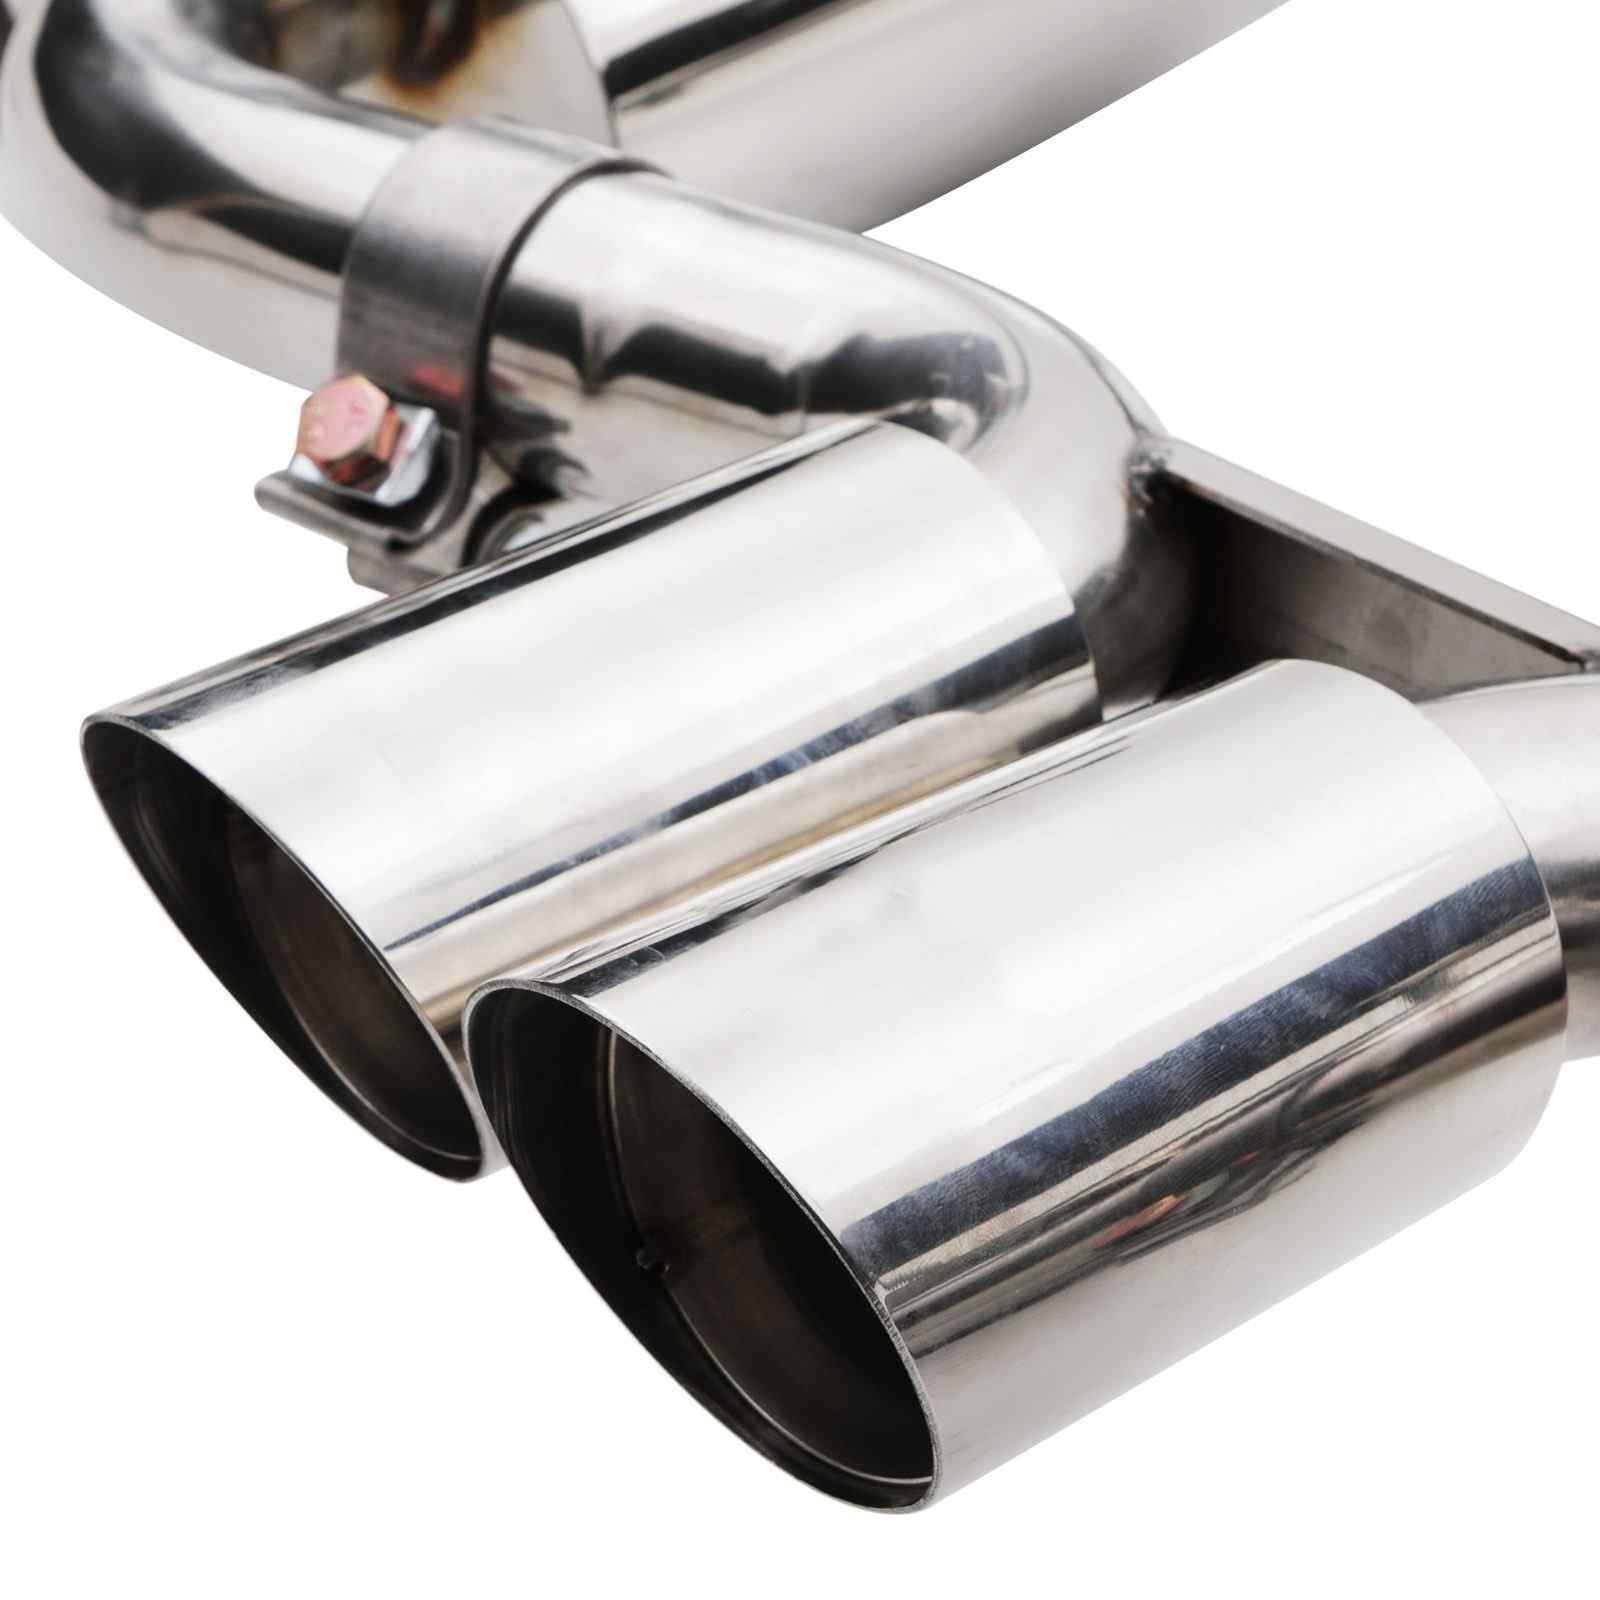 Manzo USA Mini Cooper Hatch R53 Stainless Steel Catback Exhaust System 